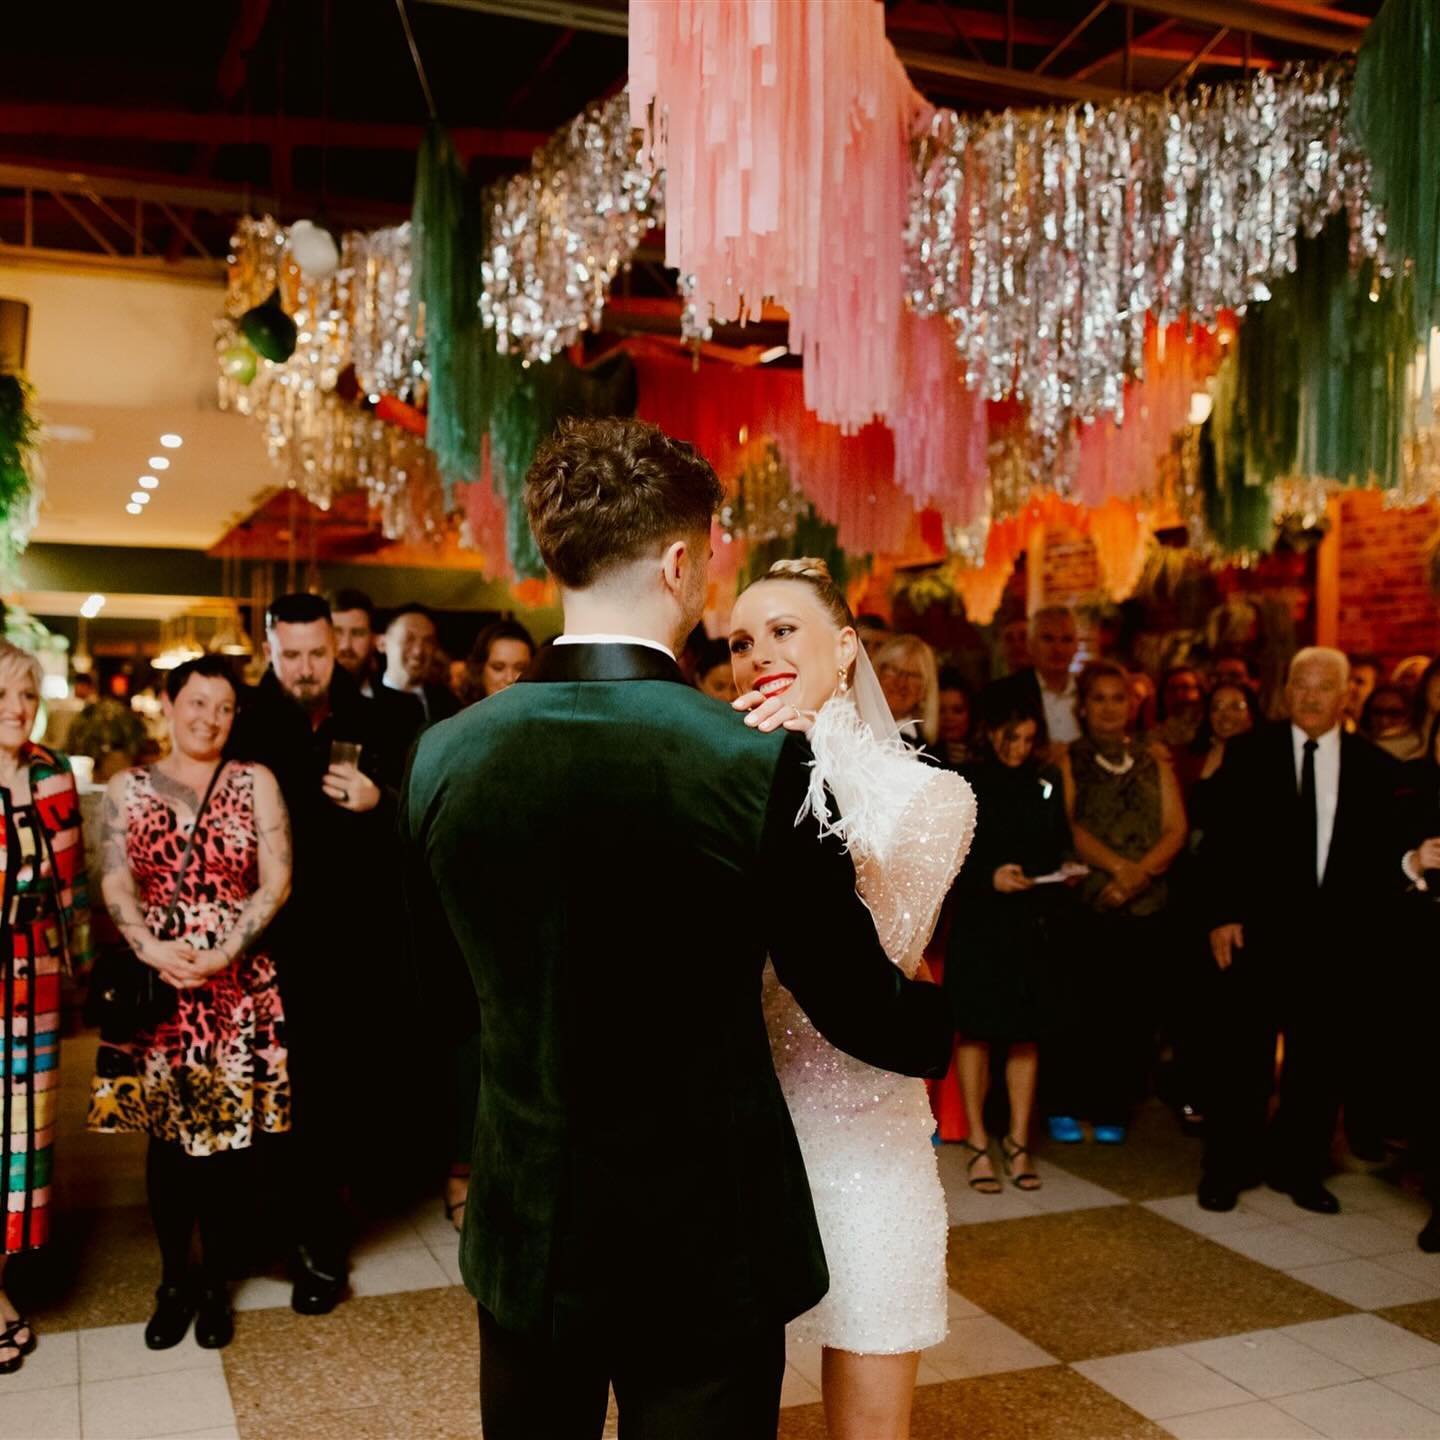 When the bride is a dancer you know the first dance is going to be one to remember &amp; the dance floor will be bumping❣️❣️

Photographer: @[17841400780630705:@madelinekatephotography] 
Florist: @[17841405221515751:@urbanantidote] 
Cake: @[178414031